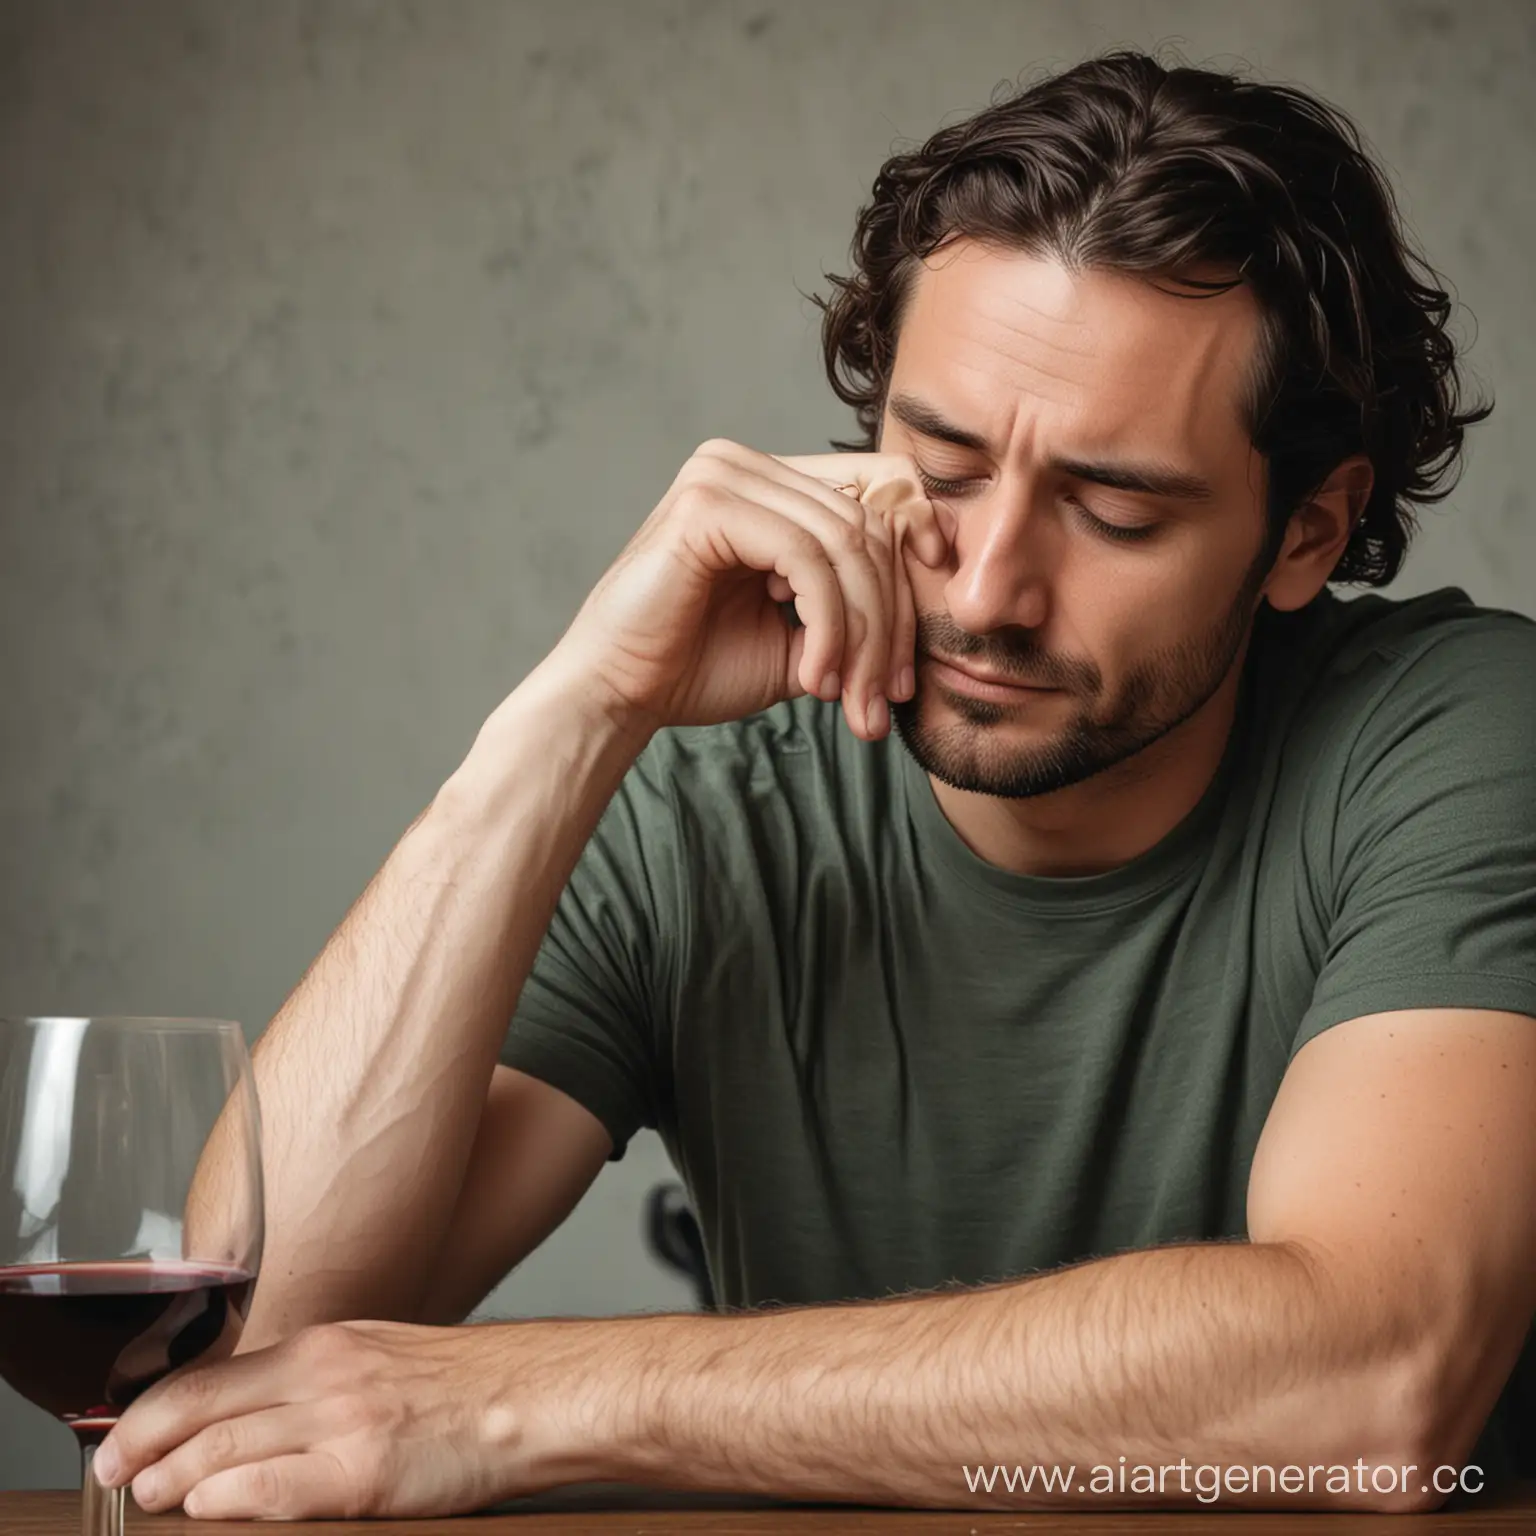 Man-Drinking-Wine-in-Sorrowful-Contemplation